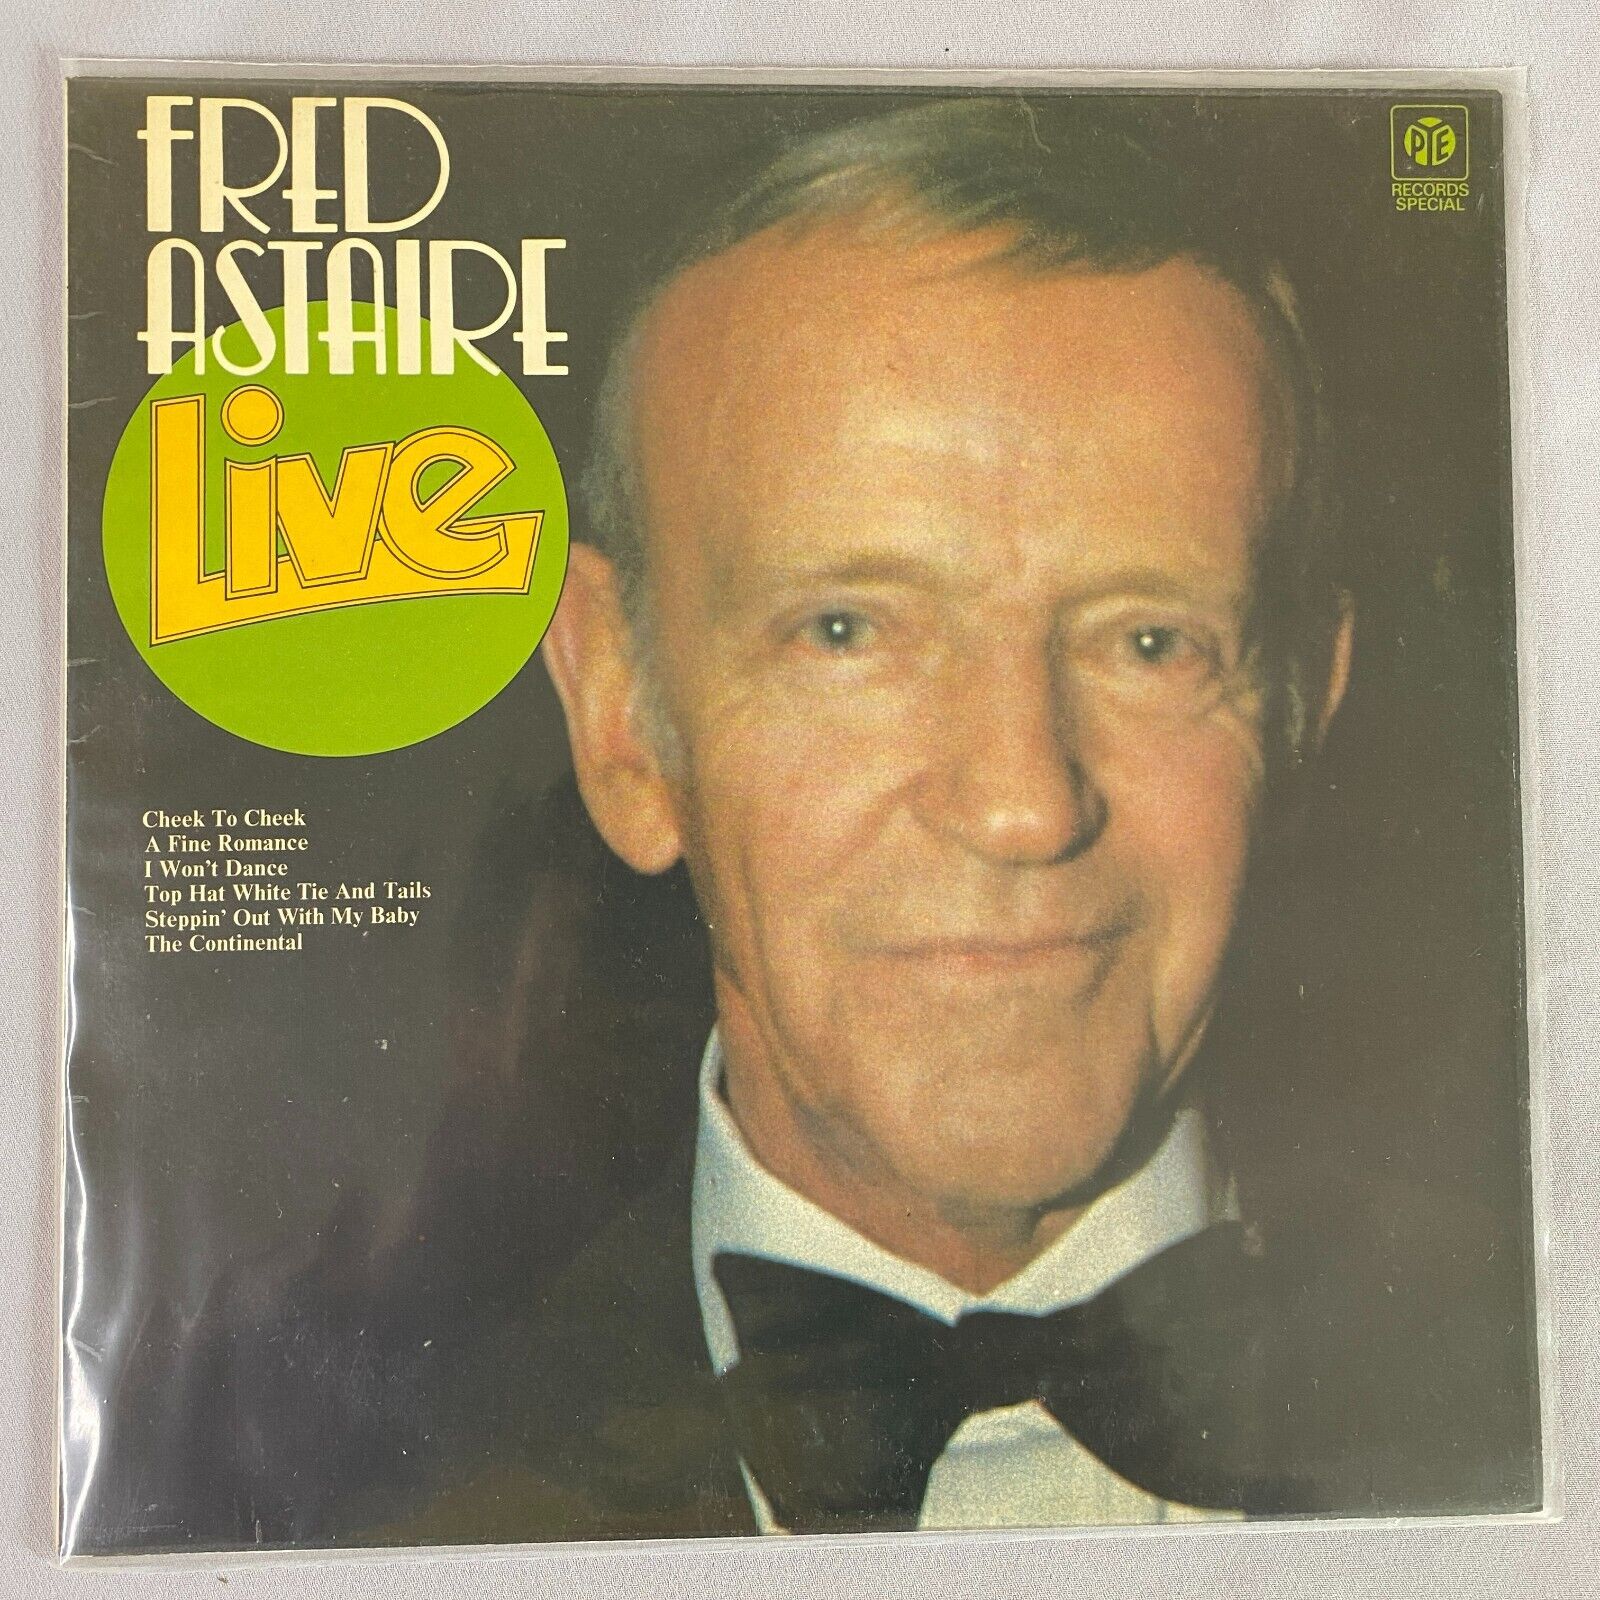 NEW VINTAGE Fred Astaire Live 1964 PKL 5542 LP PYE Records Special Classic Music